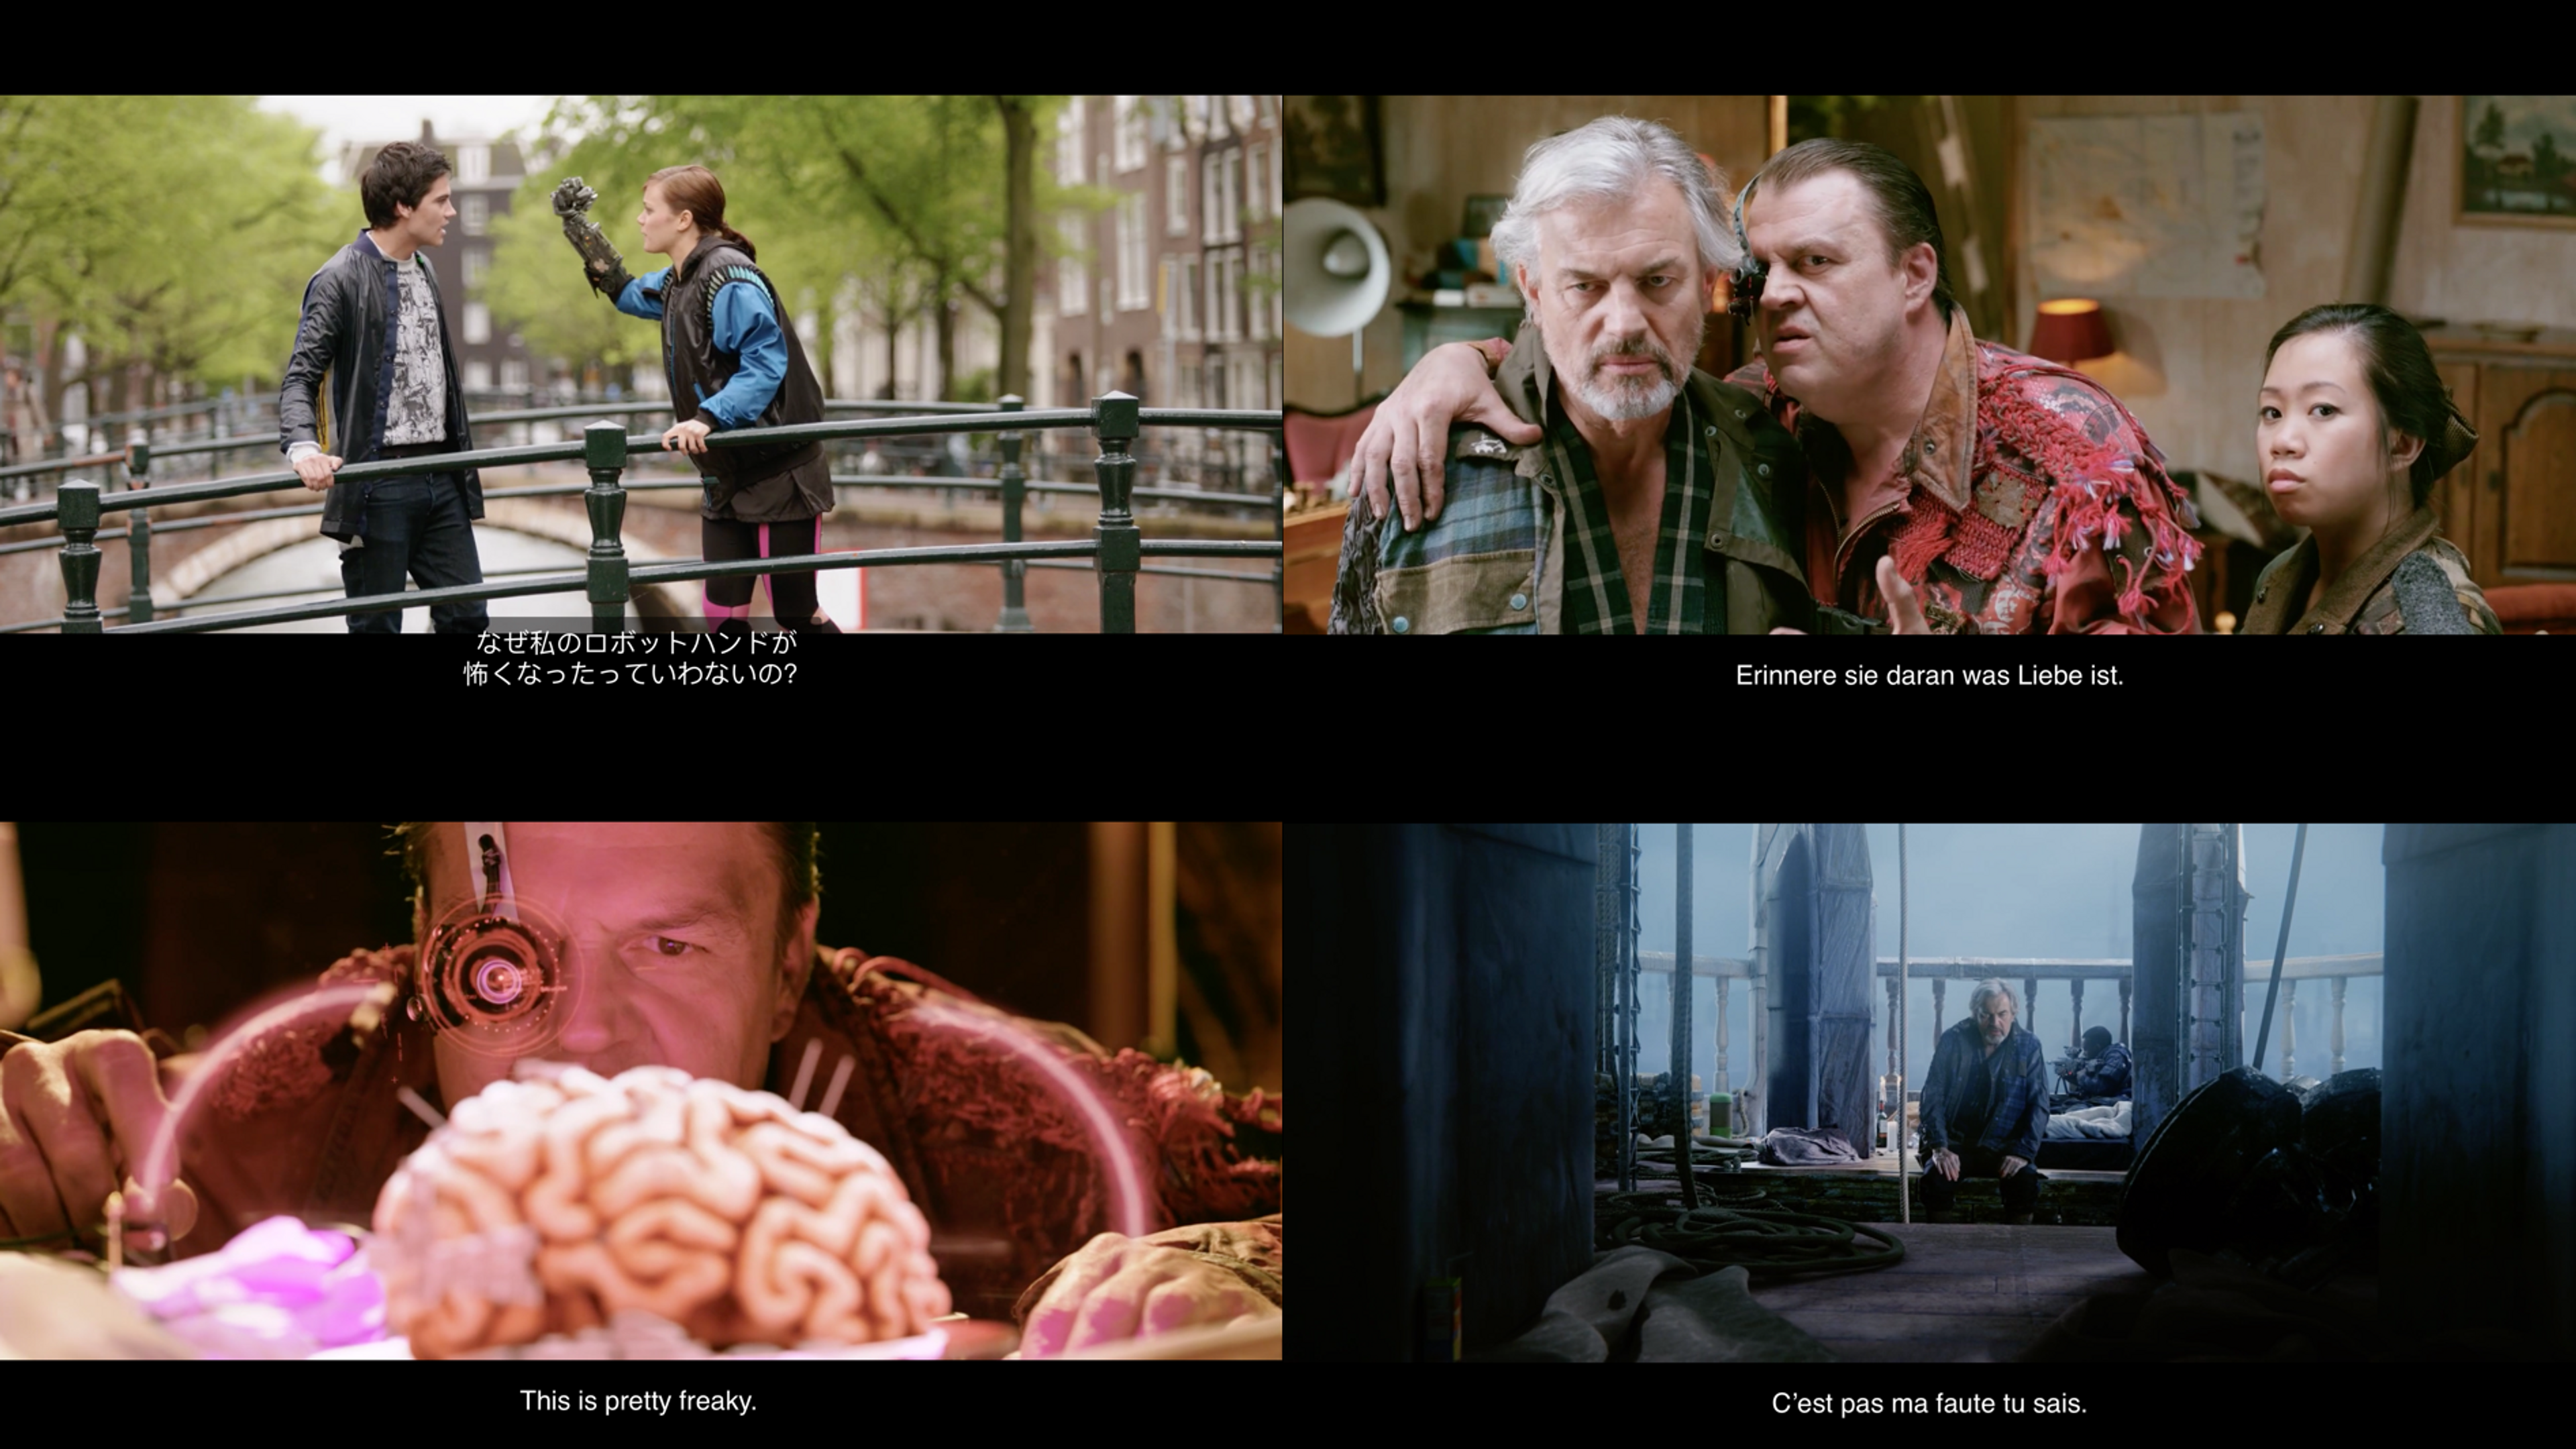 A selection of video frames from "Tears of Steel" showing subtitles in a variety of languages.